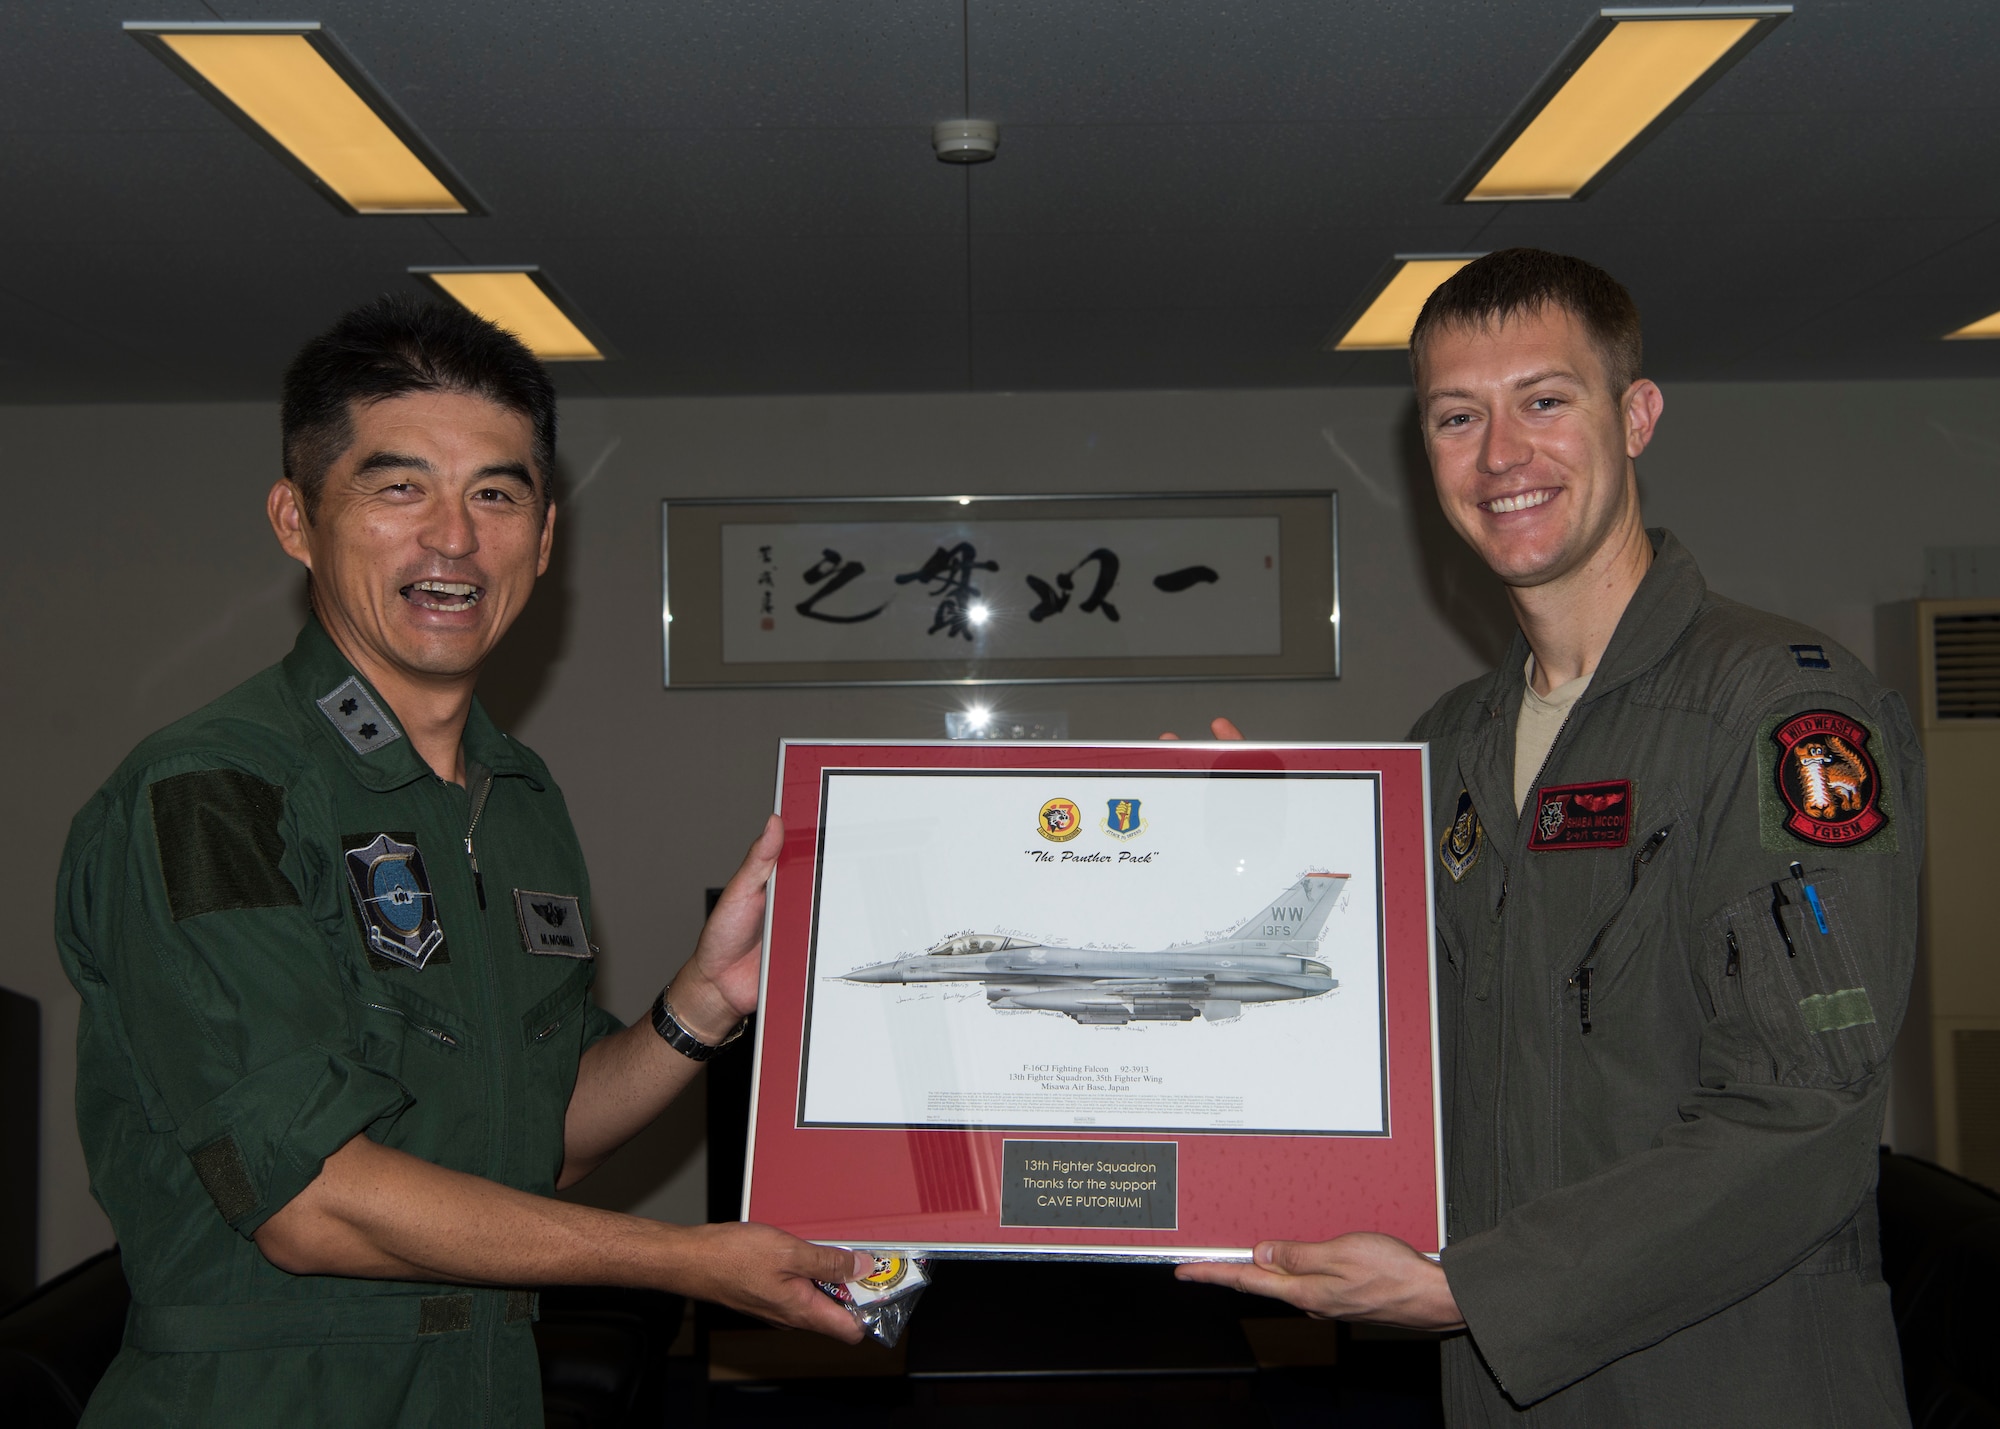 Japan Air Self-Defense Force Maj. Gen. Masahito Monma, the Japan Air Self-Defense Force 6th Air Wing commander, and U.S. Air Force Capt. Phillip McCoy, a 13th Fighter Squadron F-16 Fighting Falcon pilot, poses for a photo with an F-16 framed photo during an aviation training relocation at Komatsu Air Base, Japan, Sept. 30, 2019. McCoy presented Monma this item as a gift to express his gratitude toward JASDF’s hospitability, support and friendship. (U.S. Air Force photo by Senior Airman Collette Brooks)